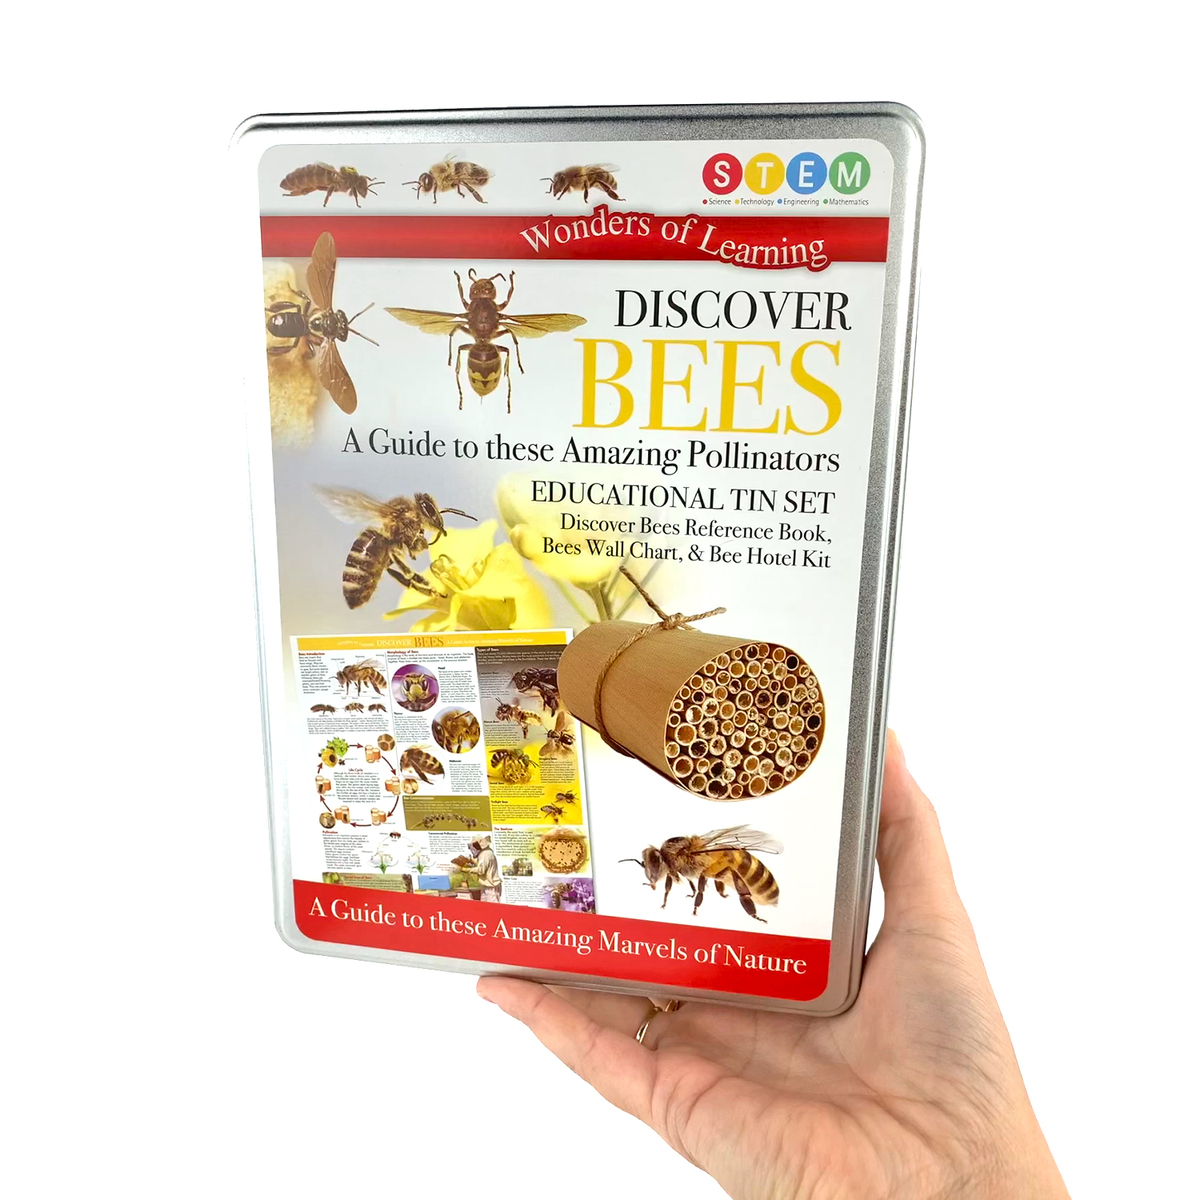 Discover Bees image